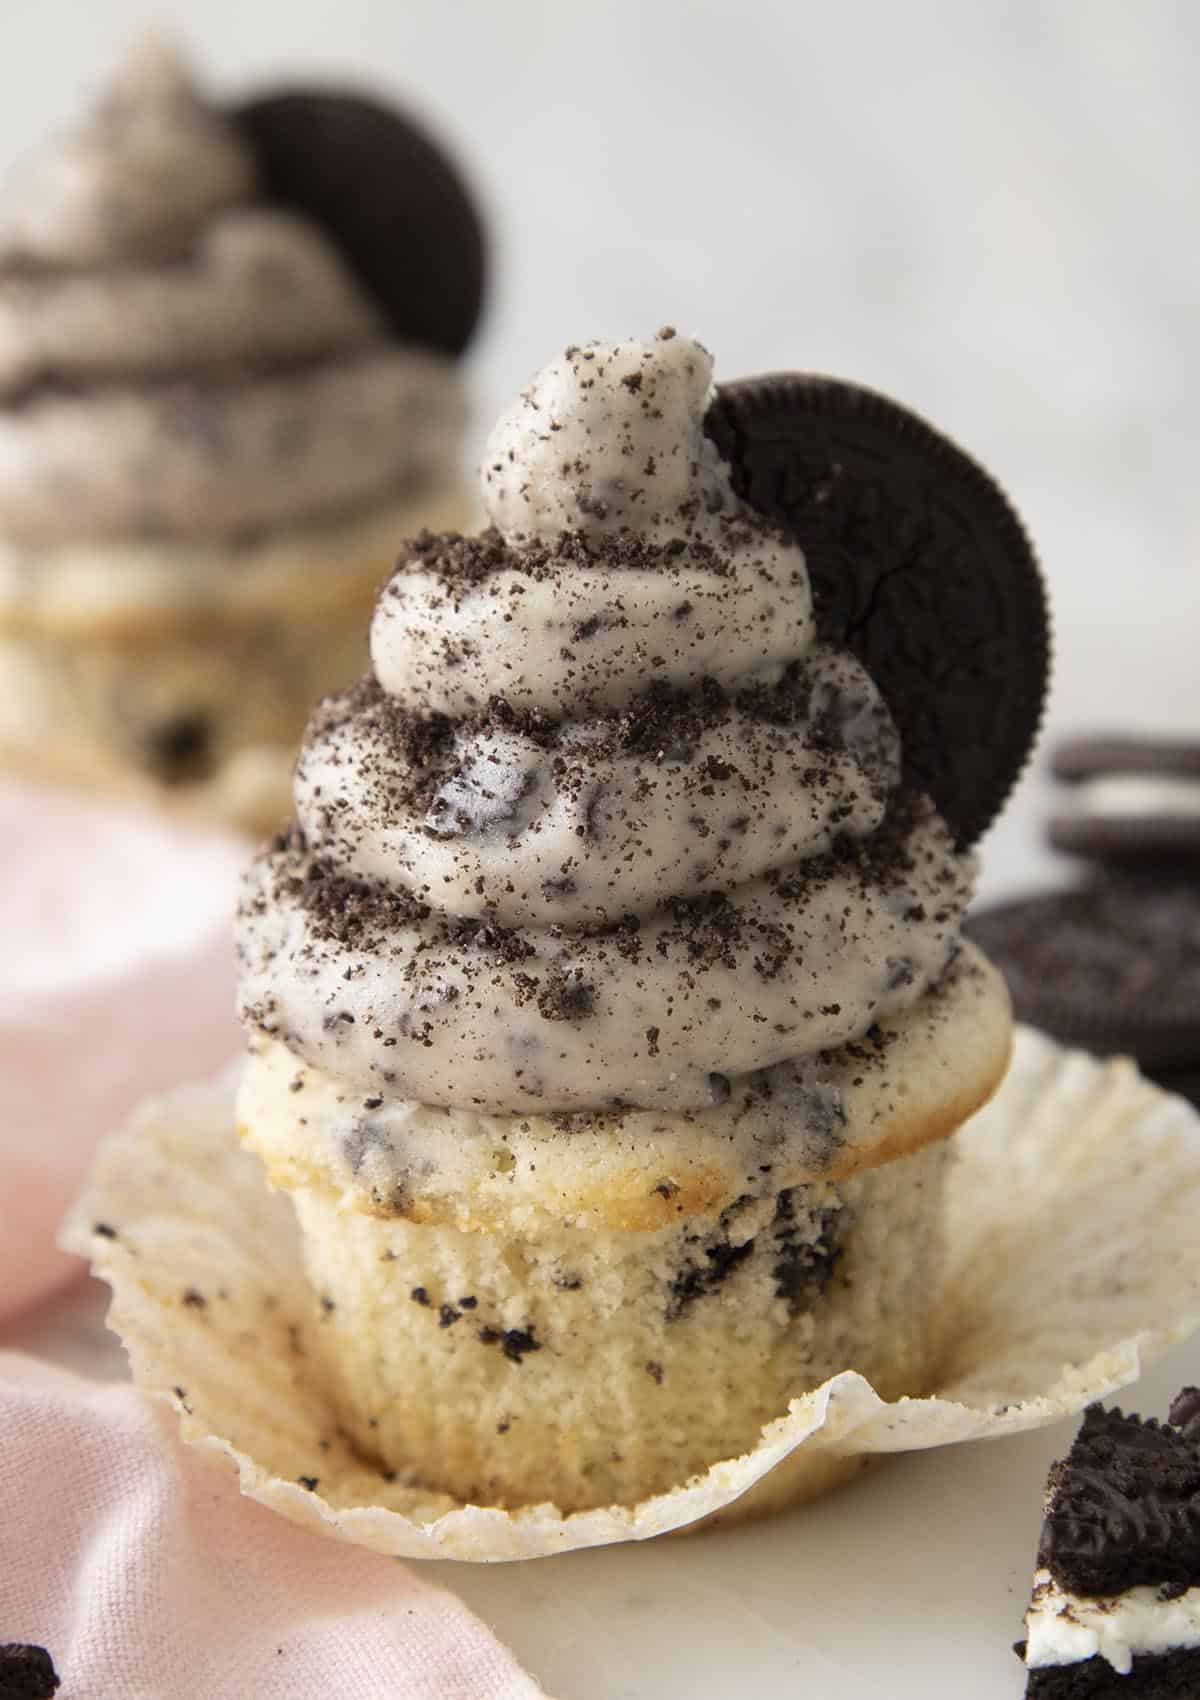 An Oreo cupcake topped with Oreo buttercream and crumbled Oreos.